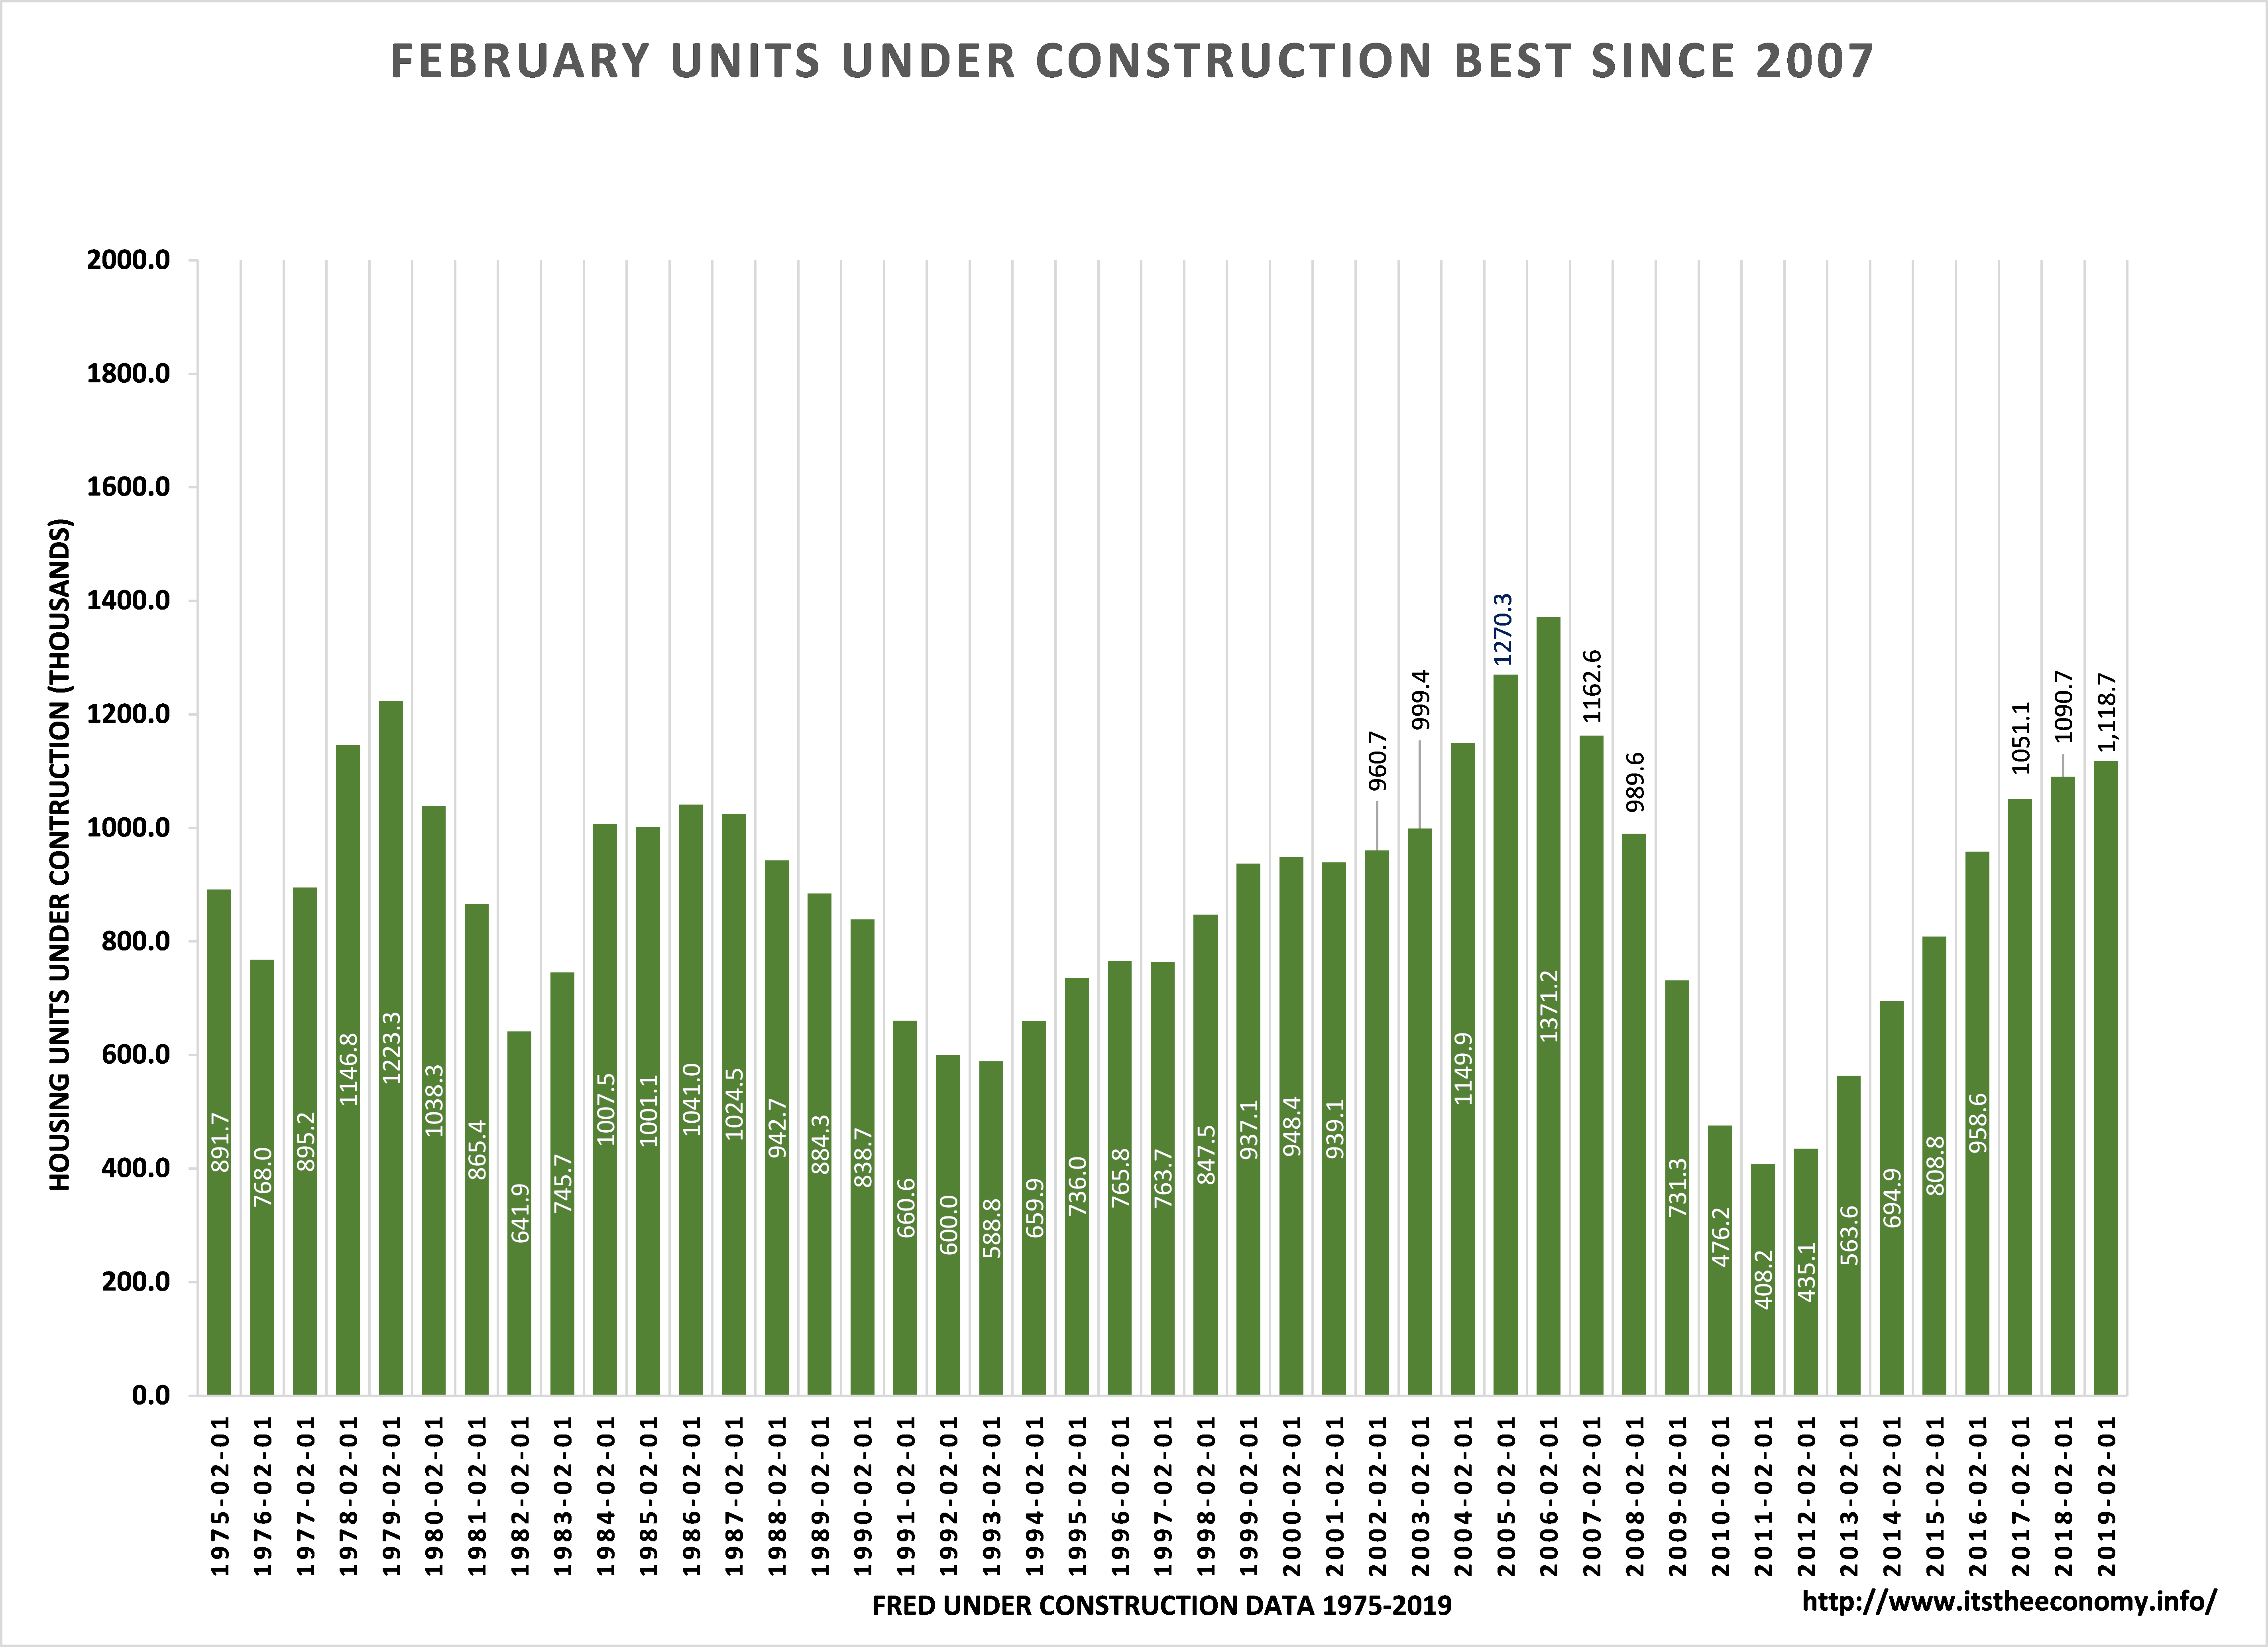 Units under construction were up from February 2018 levels and near the highest level ever. 